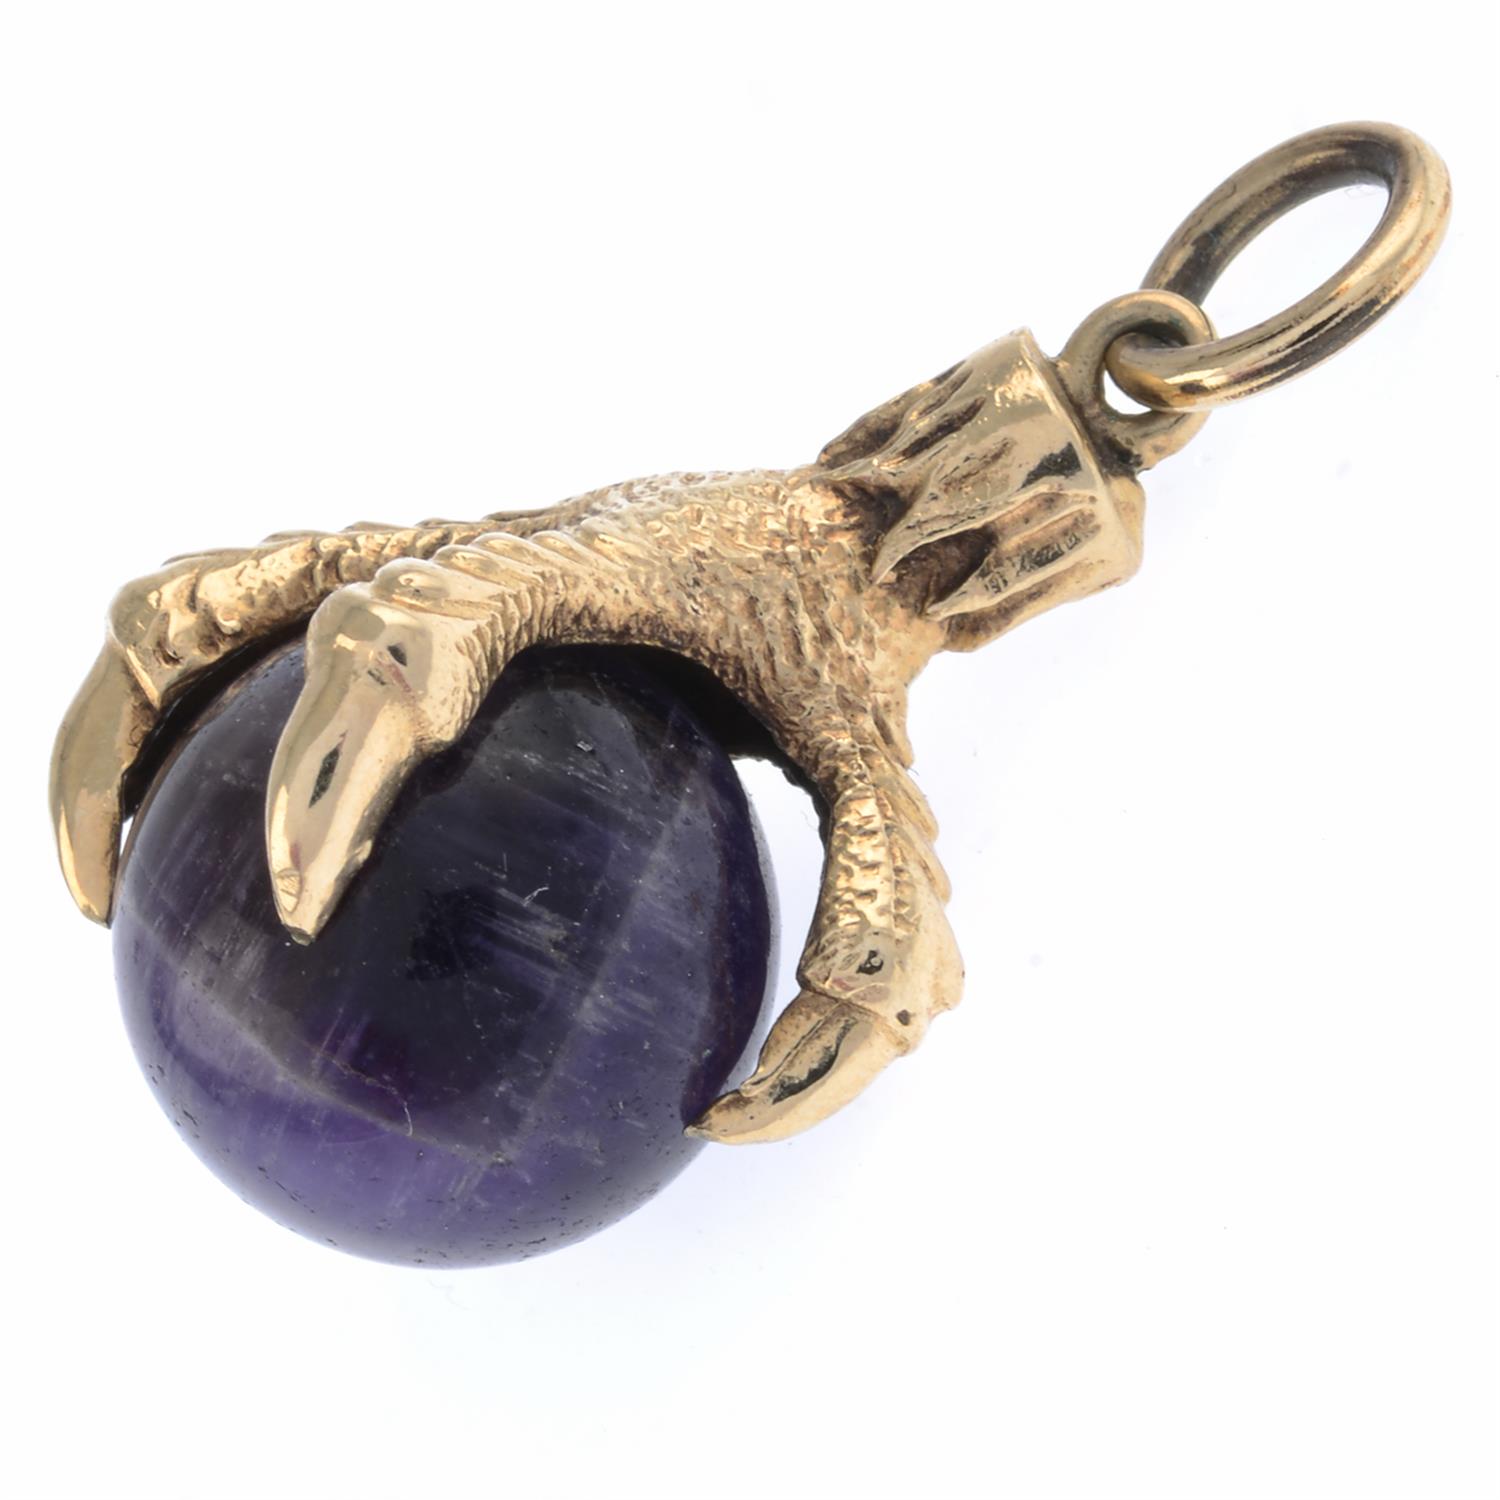 9ct gold amethyst claw pendant / charm - Image 2 of 2